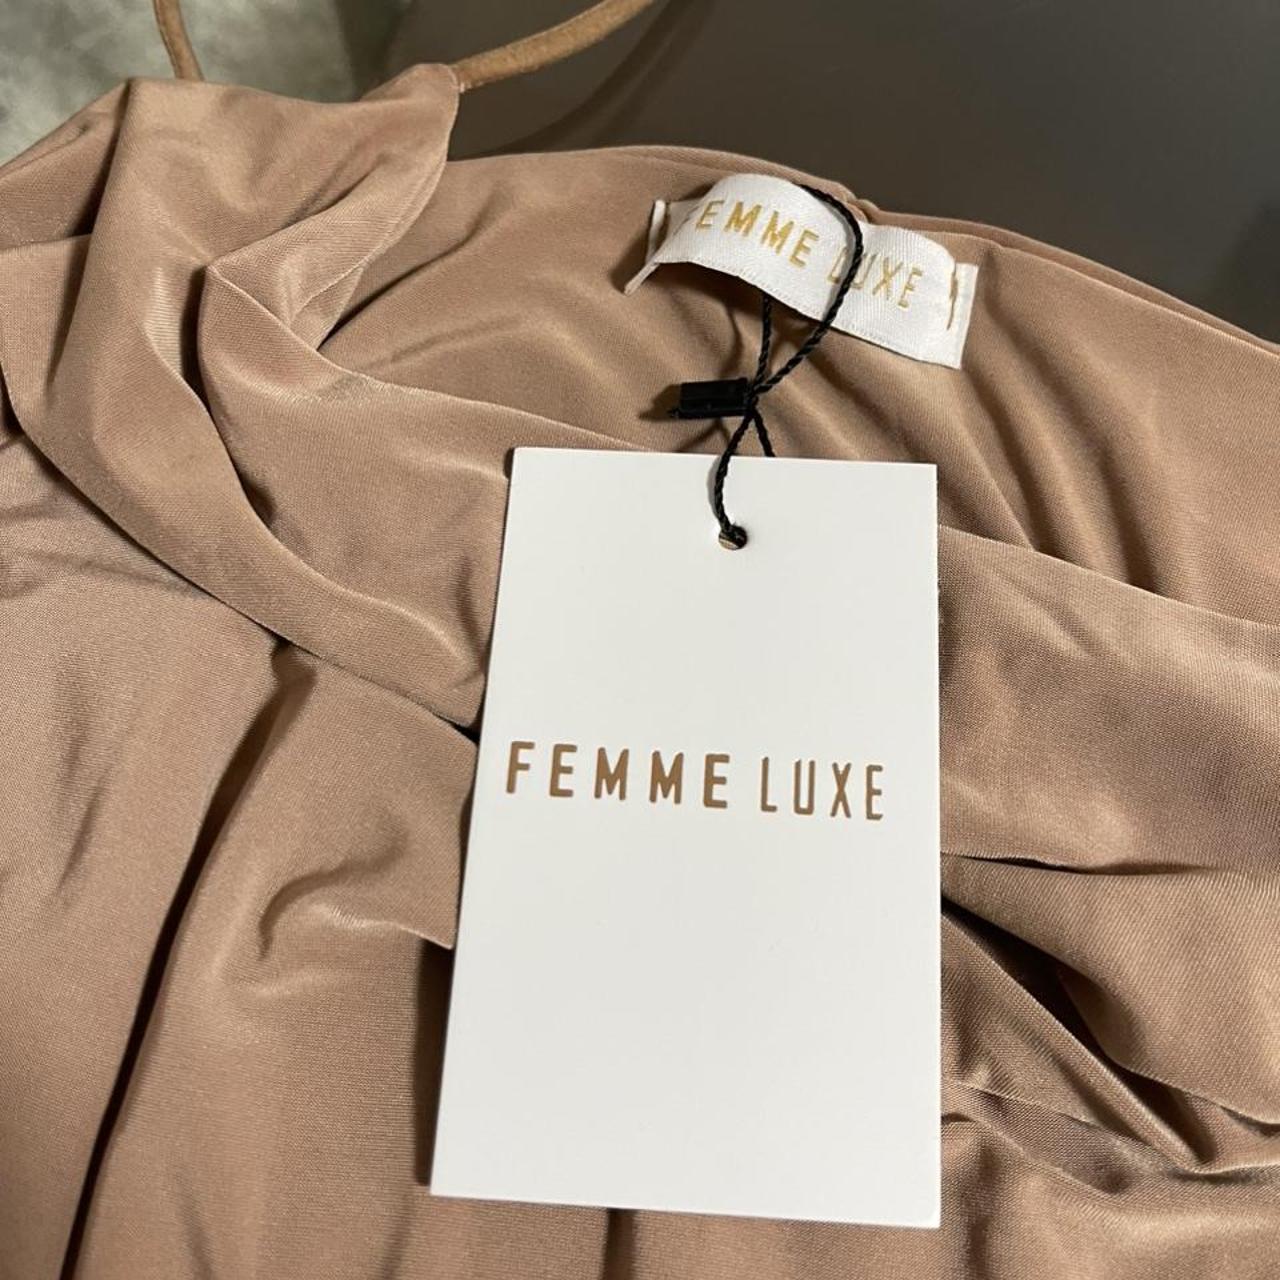 Femme Luxe Women's Tan and Brown Dress (2)